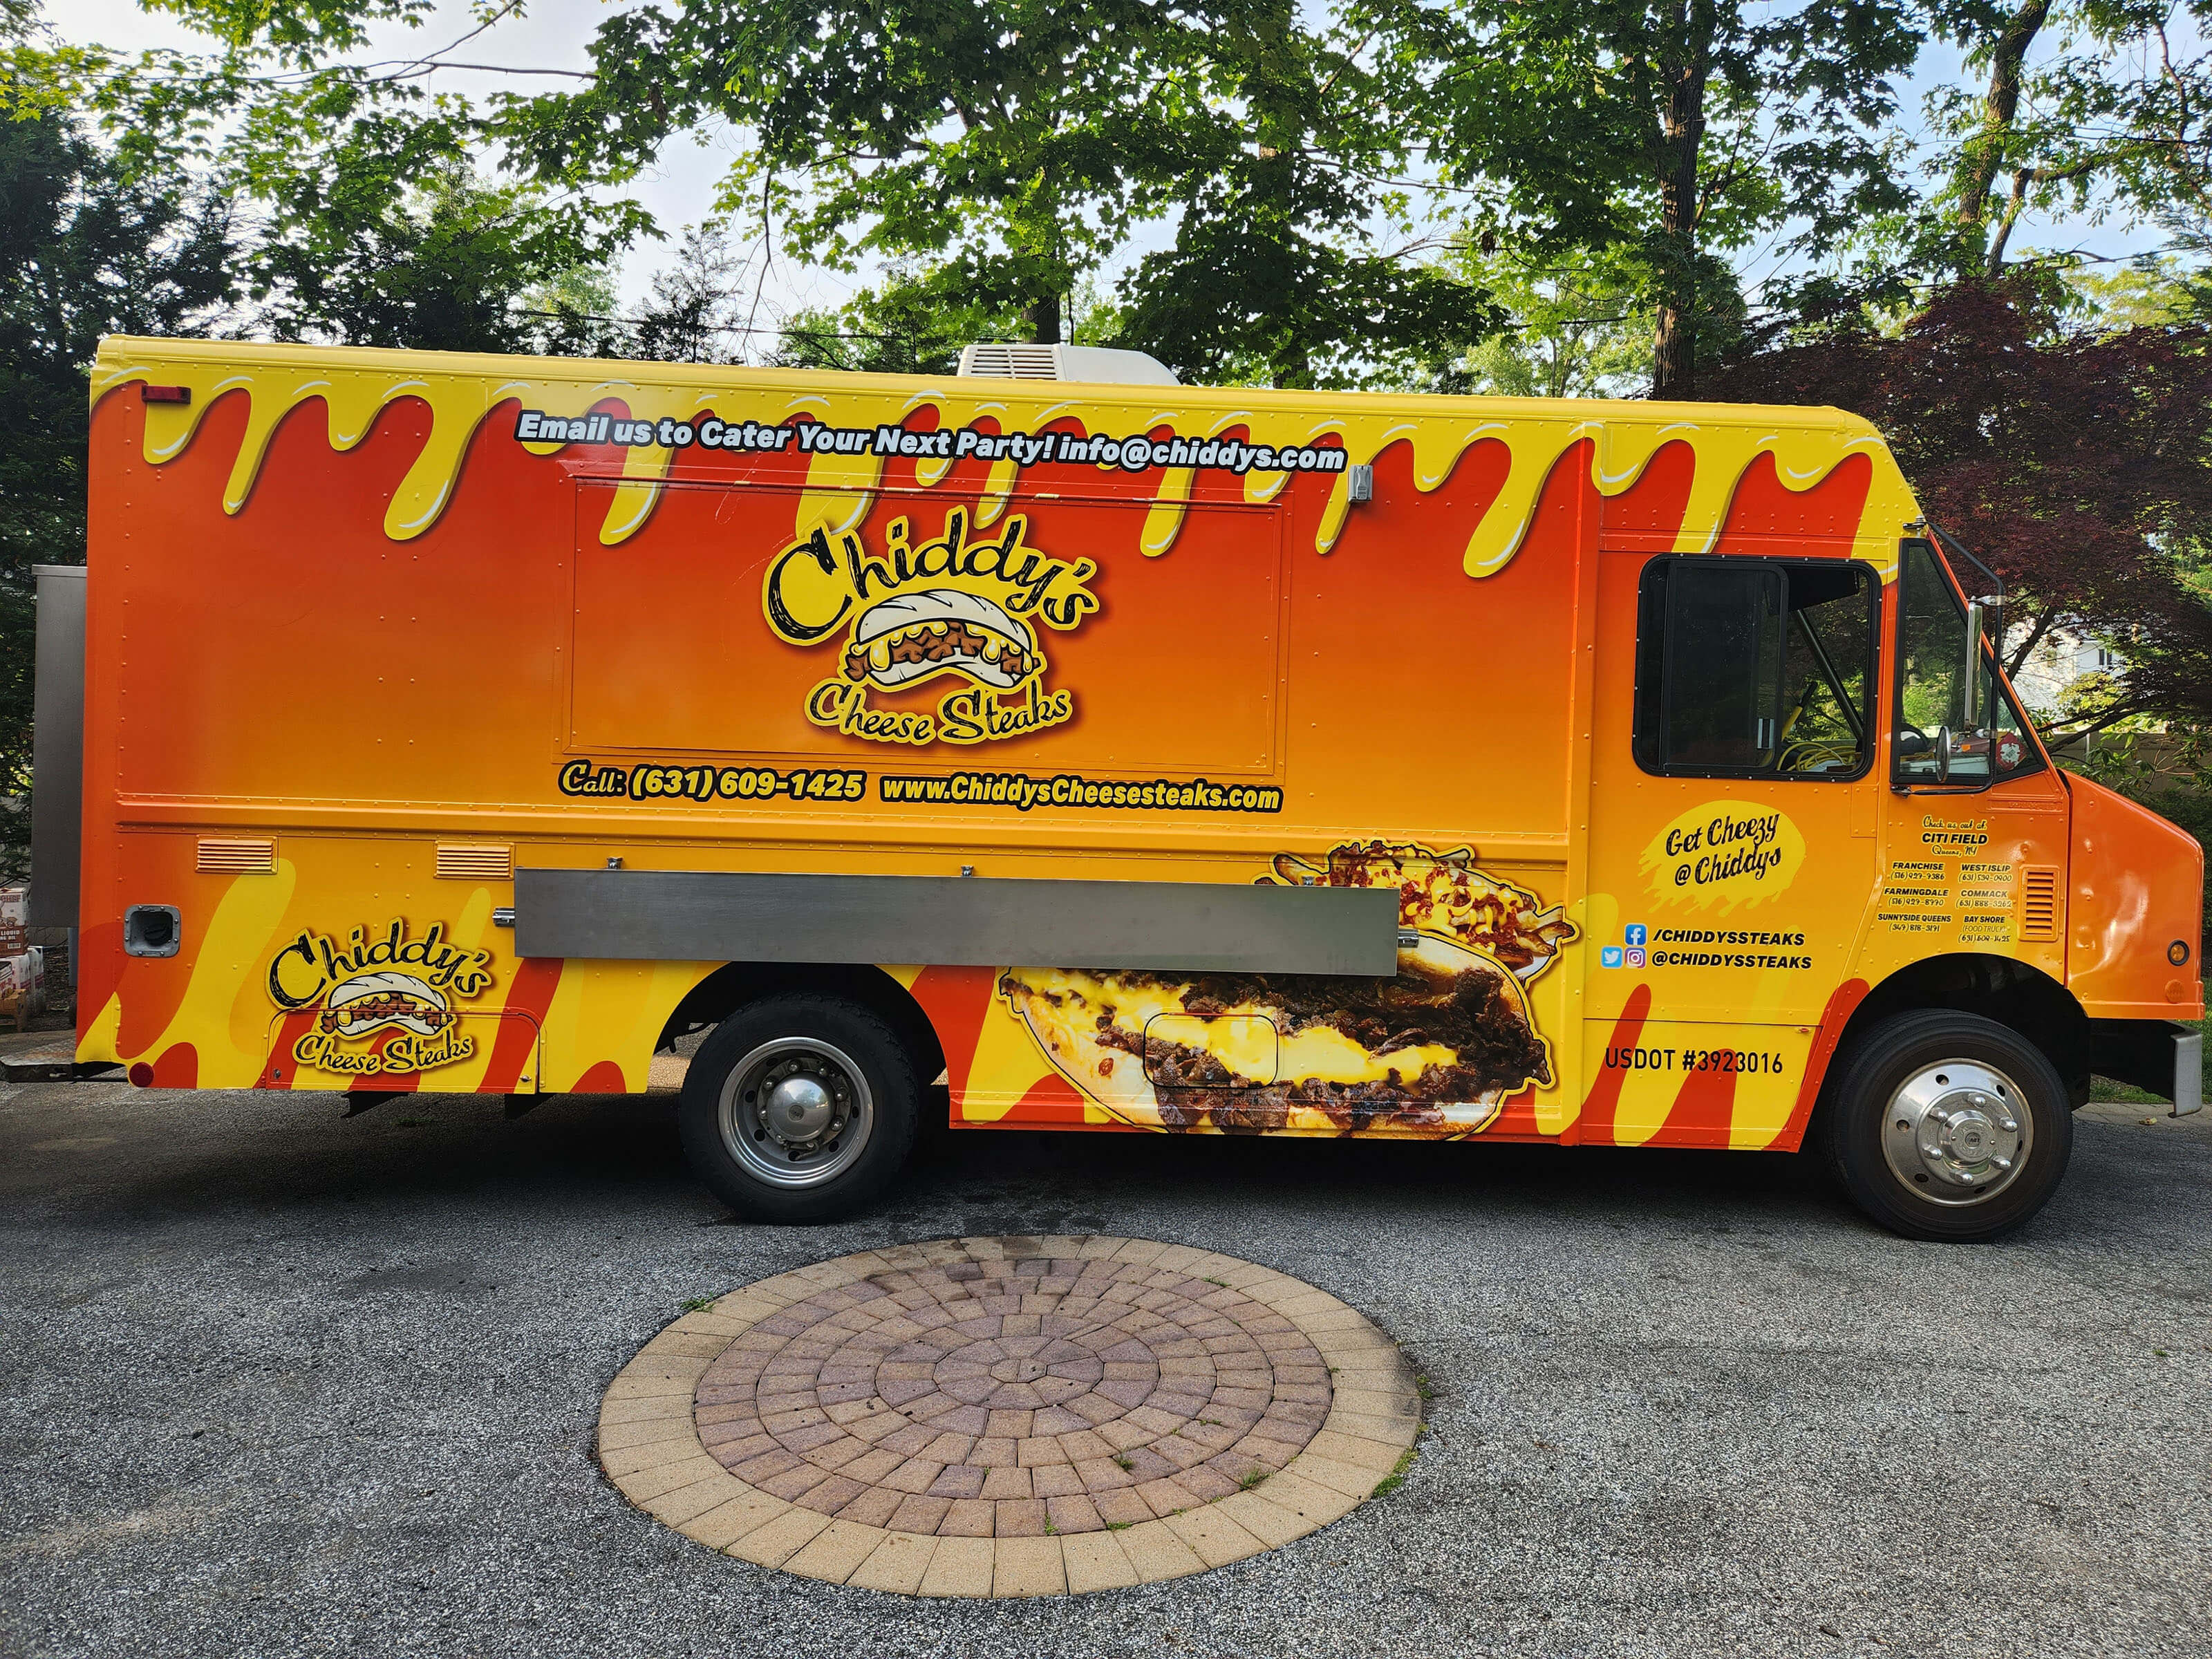 A large, brightly colored food truck with the Chiddy's Cheesesteak logo and yellow cheese-inspired graphics dripping on the top